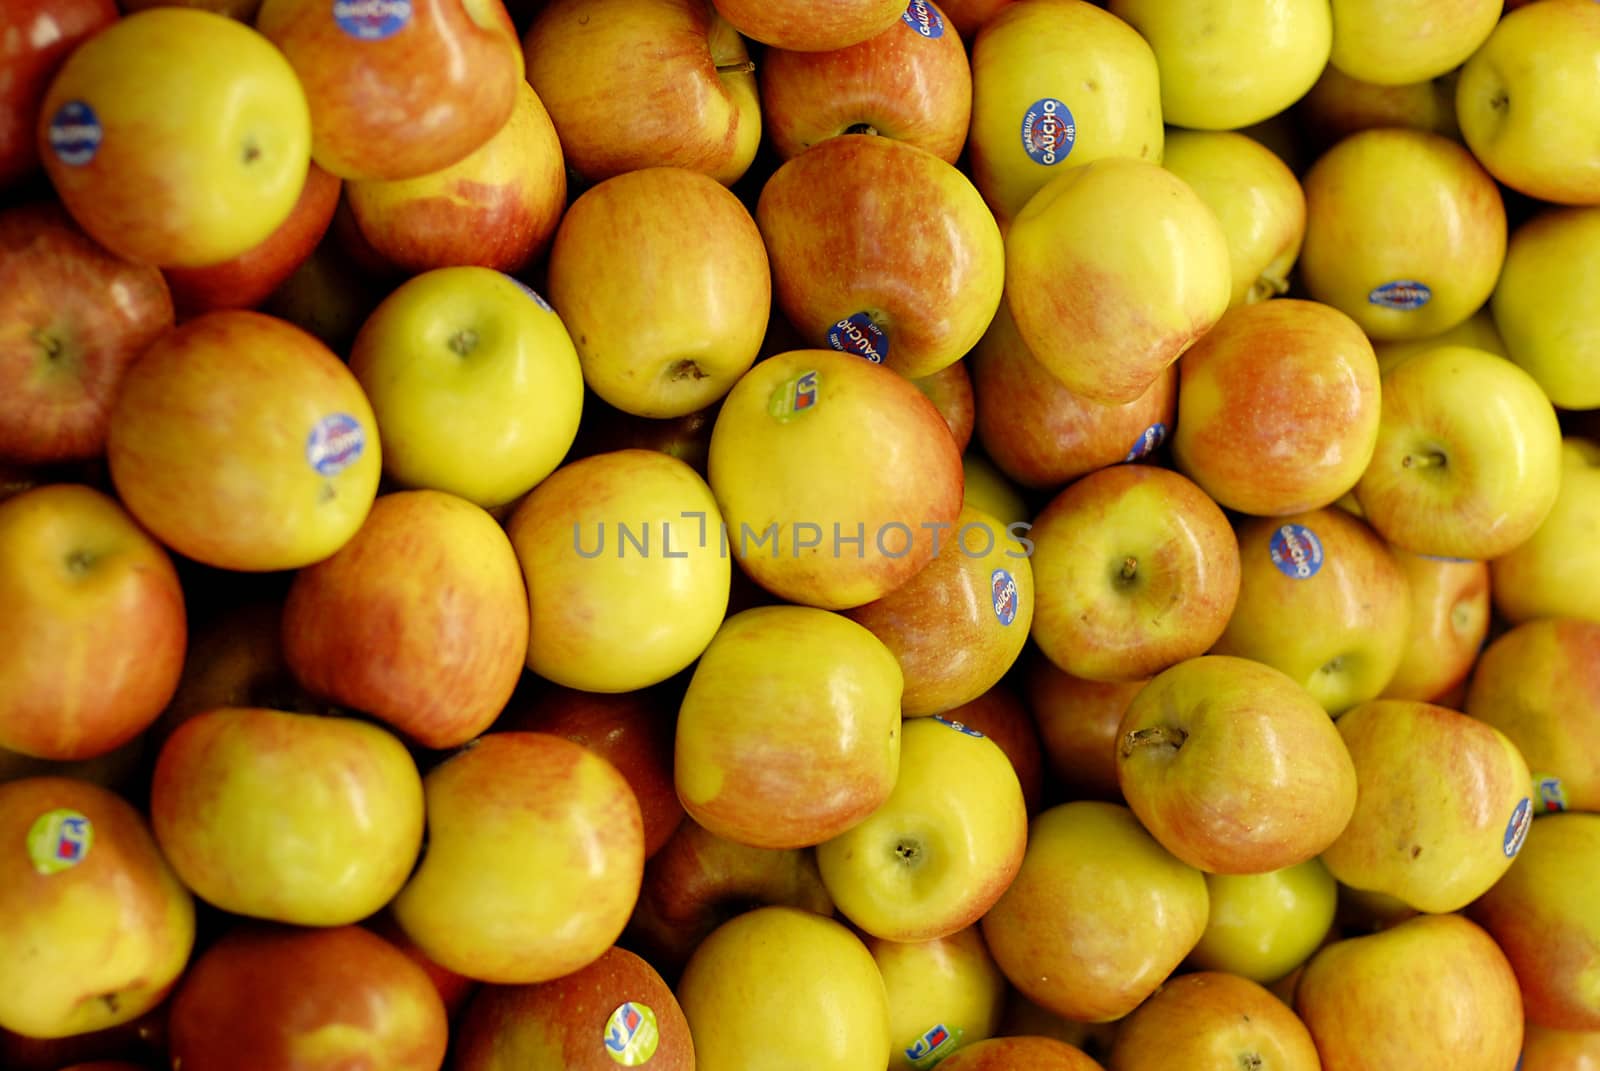 Yummy pile of apples in a market stall by stockyimages